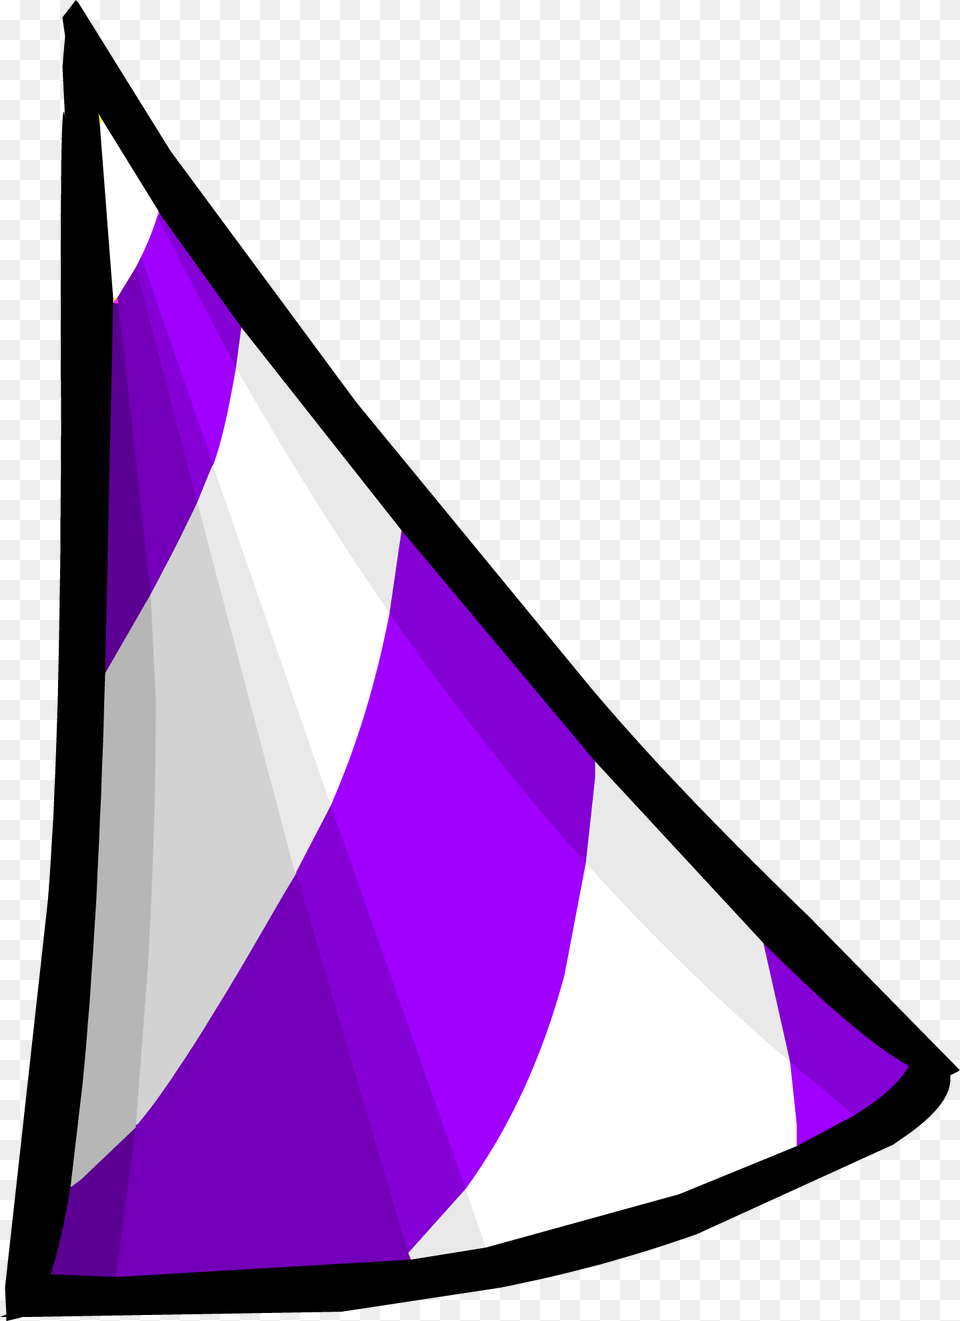 Club Penguin Rewritten Wiki Club Penguin Rewritten 2nd Anniversary Hat, Clothing, Triangle, Party Hat, Purple Free Png Download